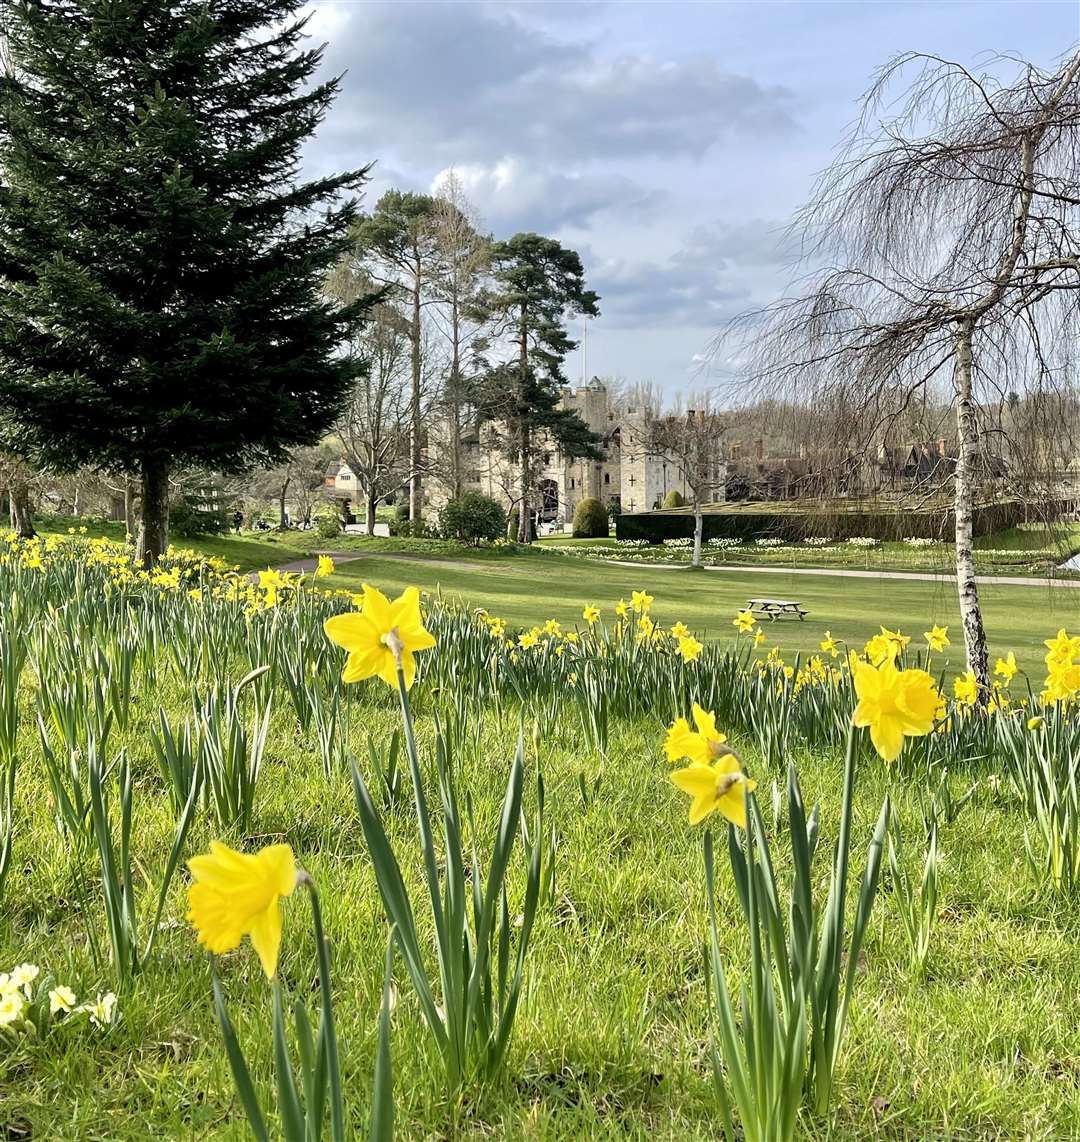 Take a stroll through the grounds and admire the Dazzling Daffodils display. Picture: Vikki Rimmer